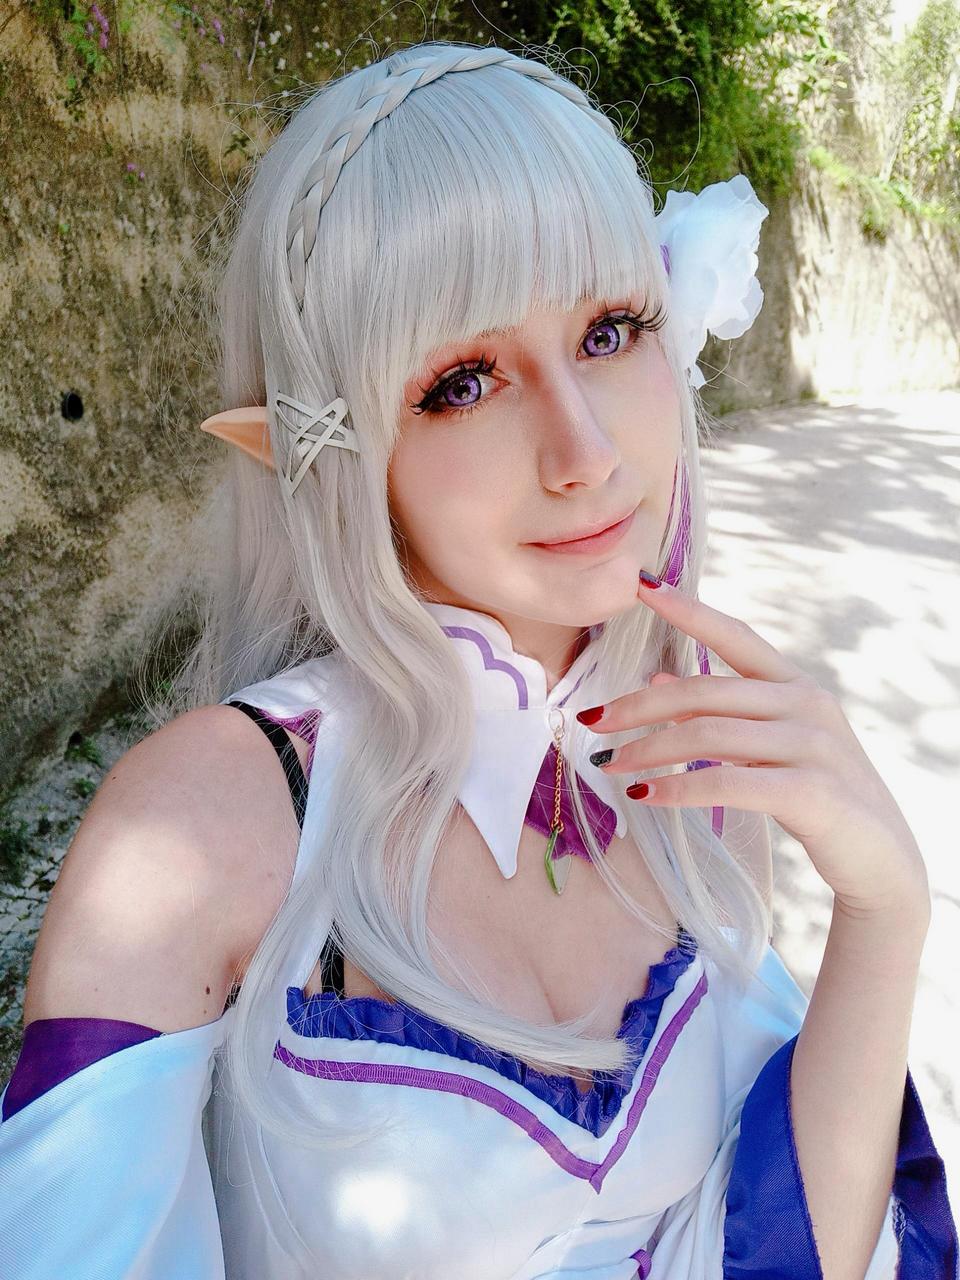 Opinions On My Emilia Cosplay By Flandes